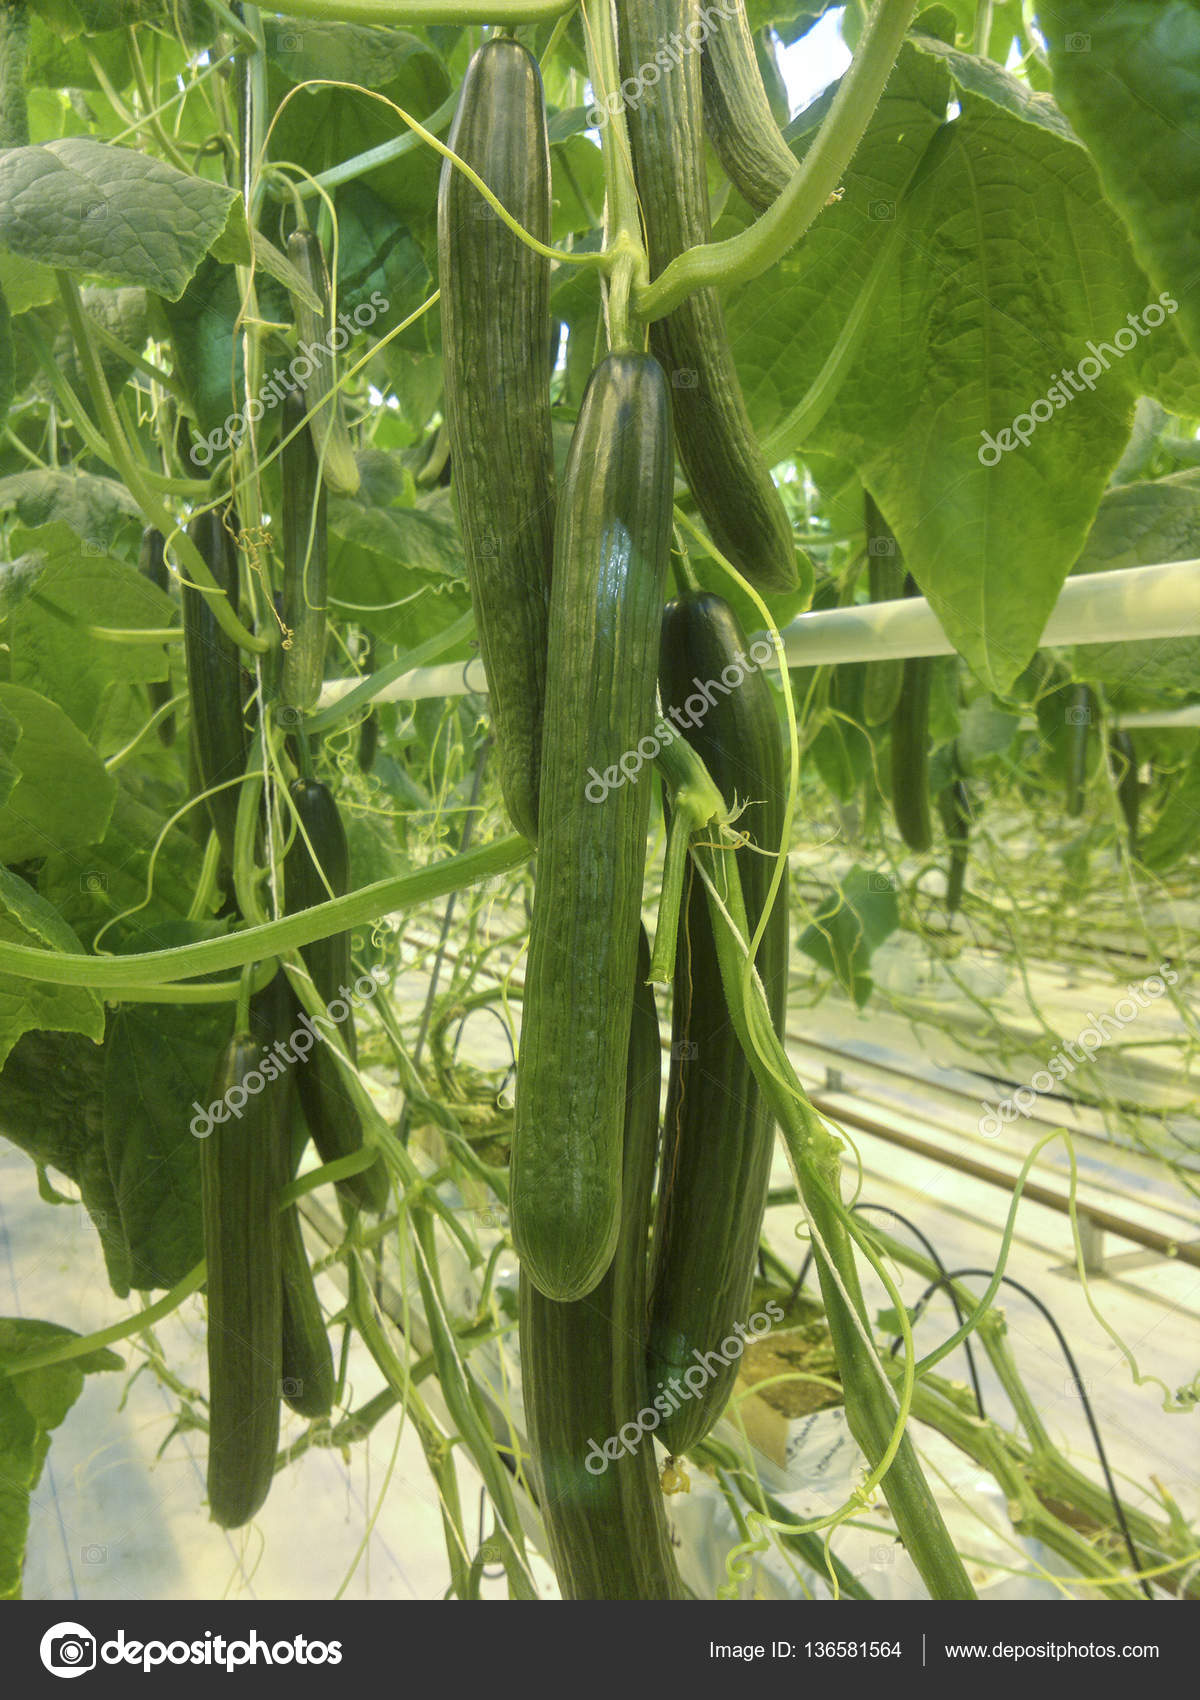 Cucumbers growing in a greenhouse for hydroponics. Fresh organic